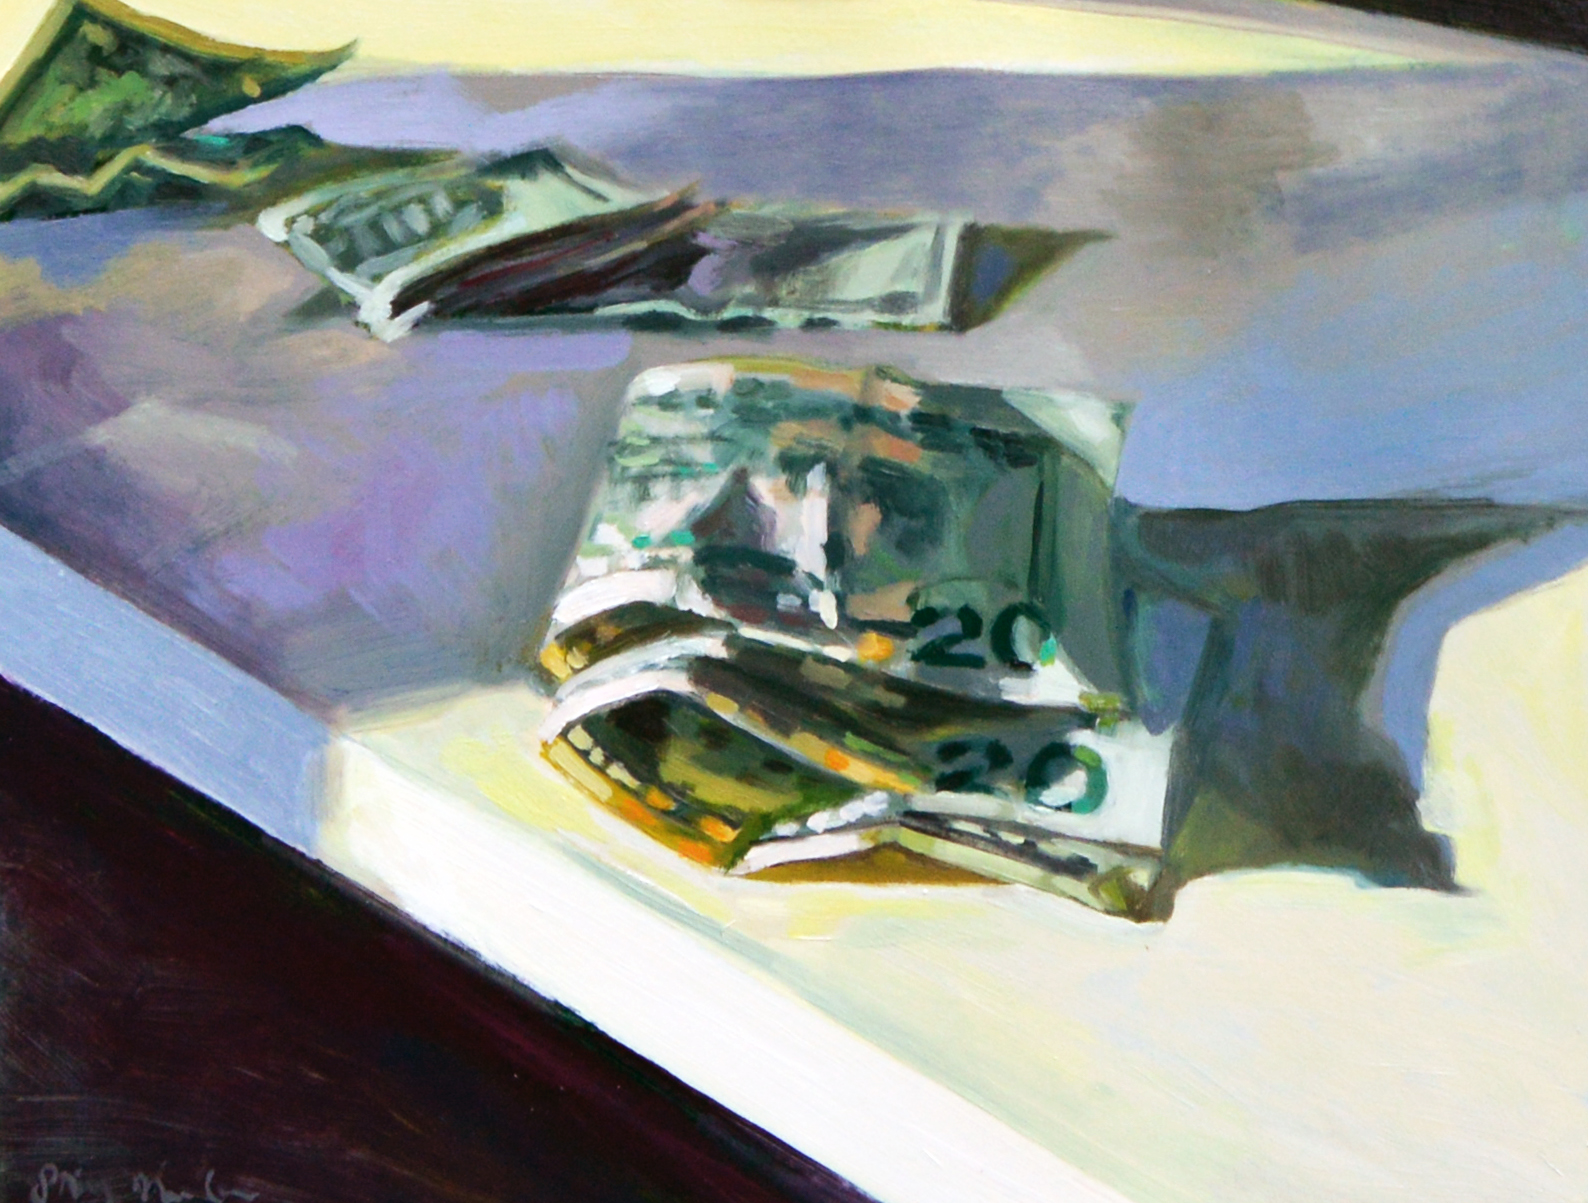 Untitled (money 3), 2017, oil on paper, 11 x 14 in